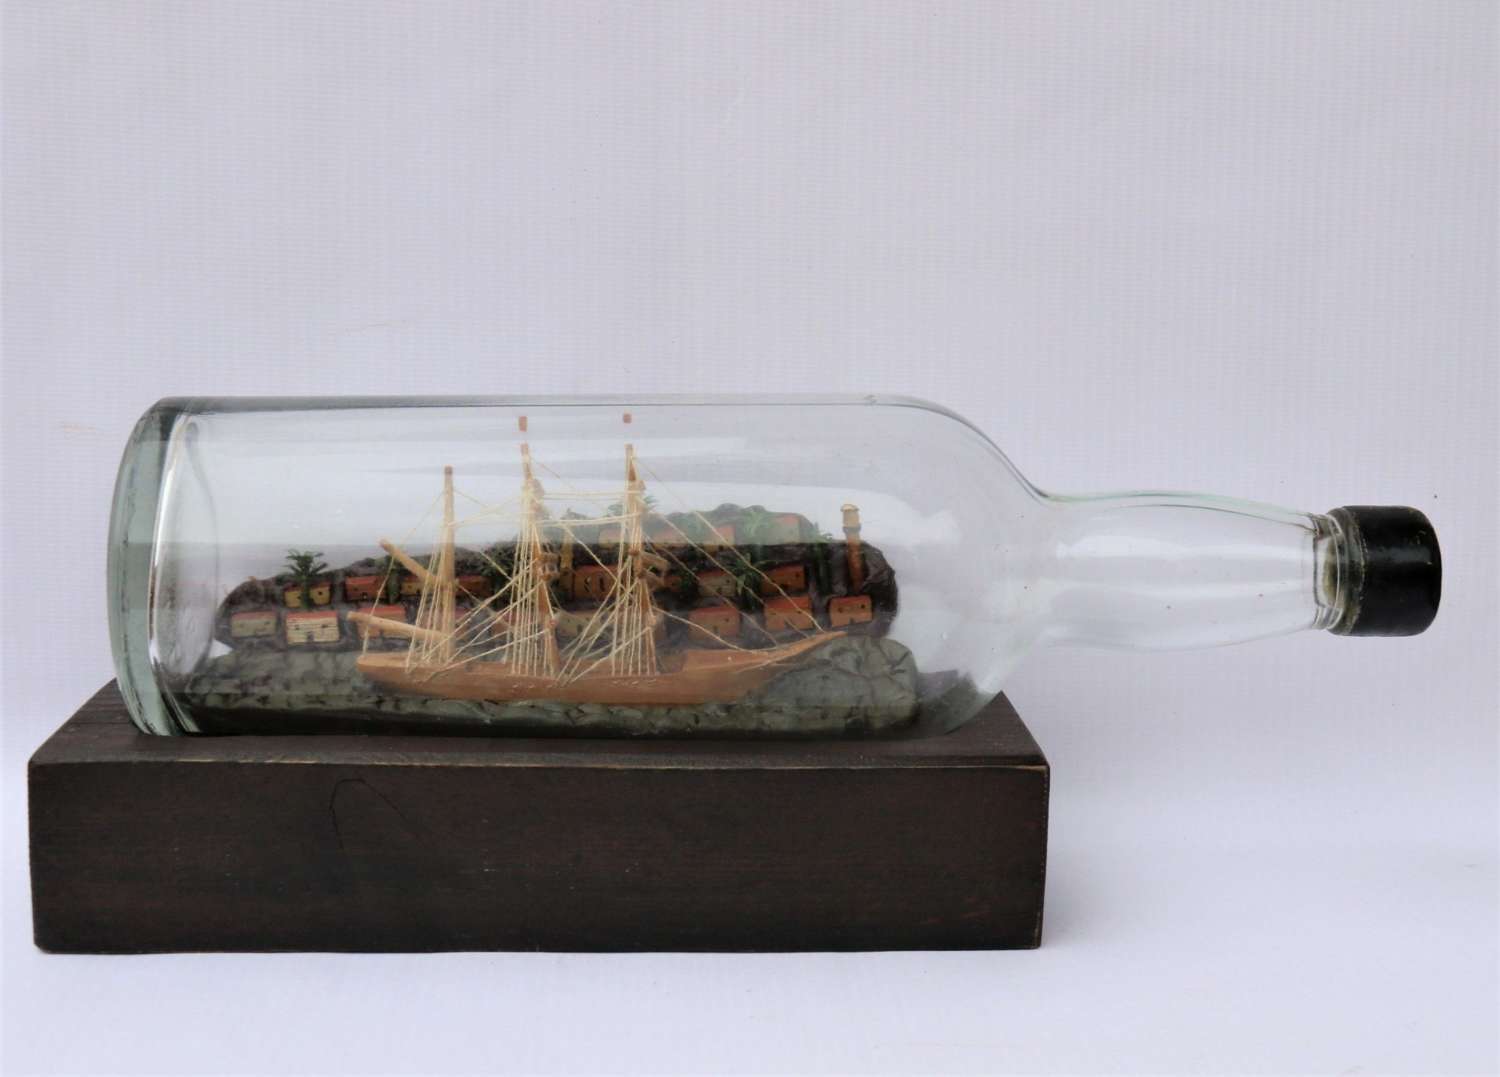 A Most Interesting Early 20th Century Model Ship Diorama Within A Bottle.